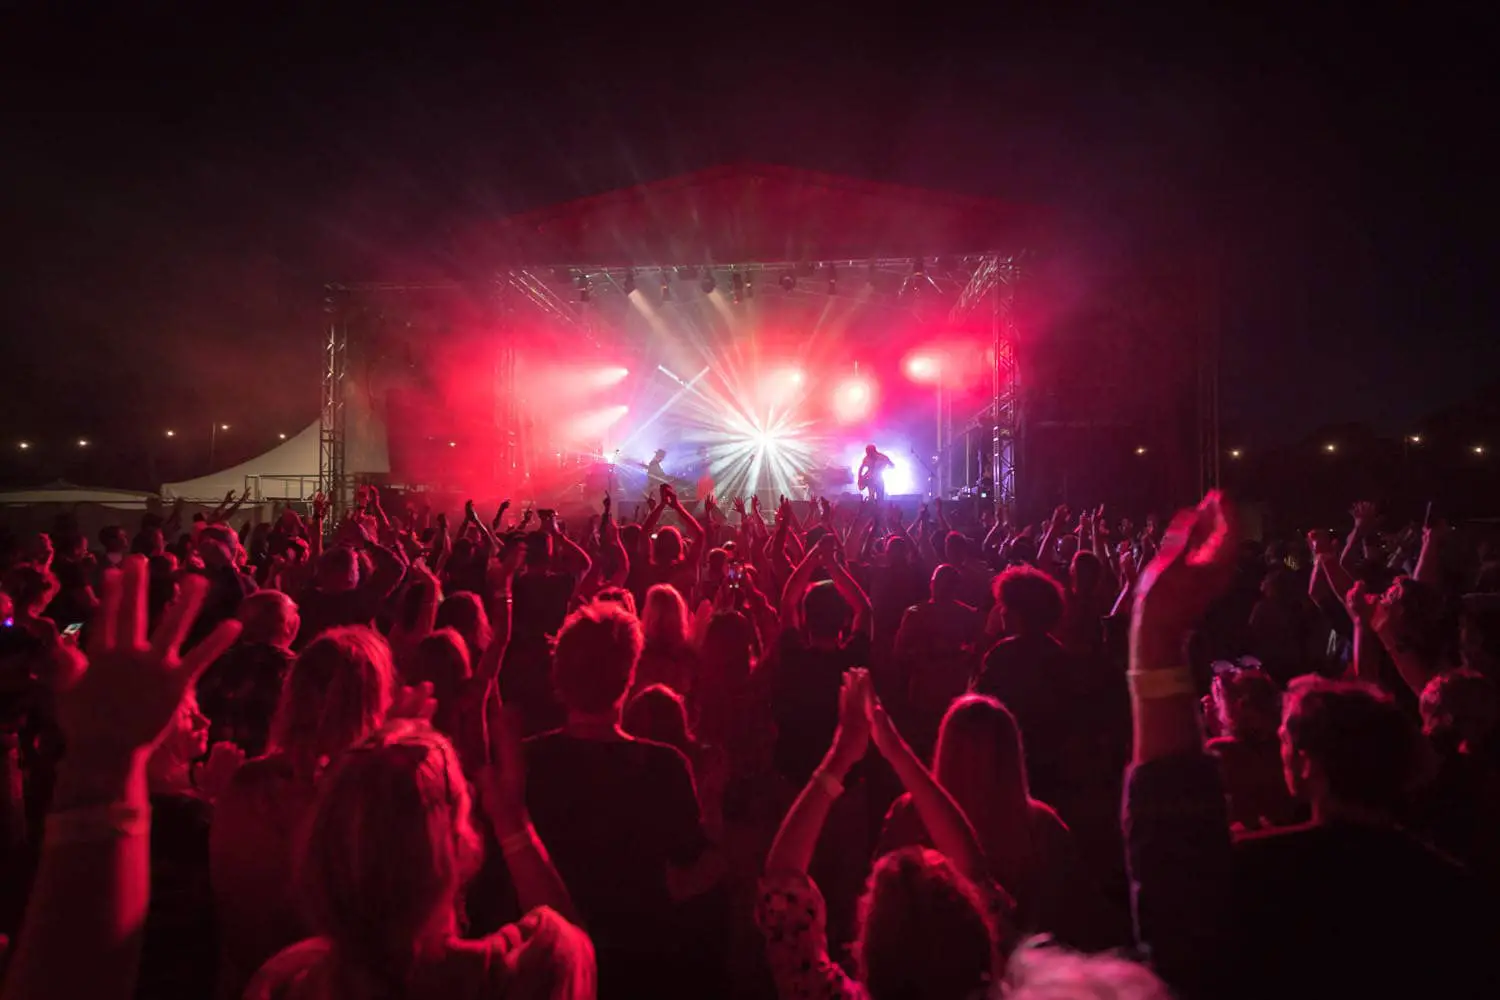 RhythmTree Festival - main stage at night with audience